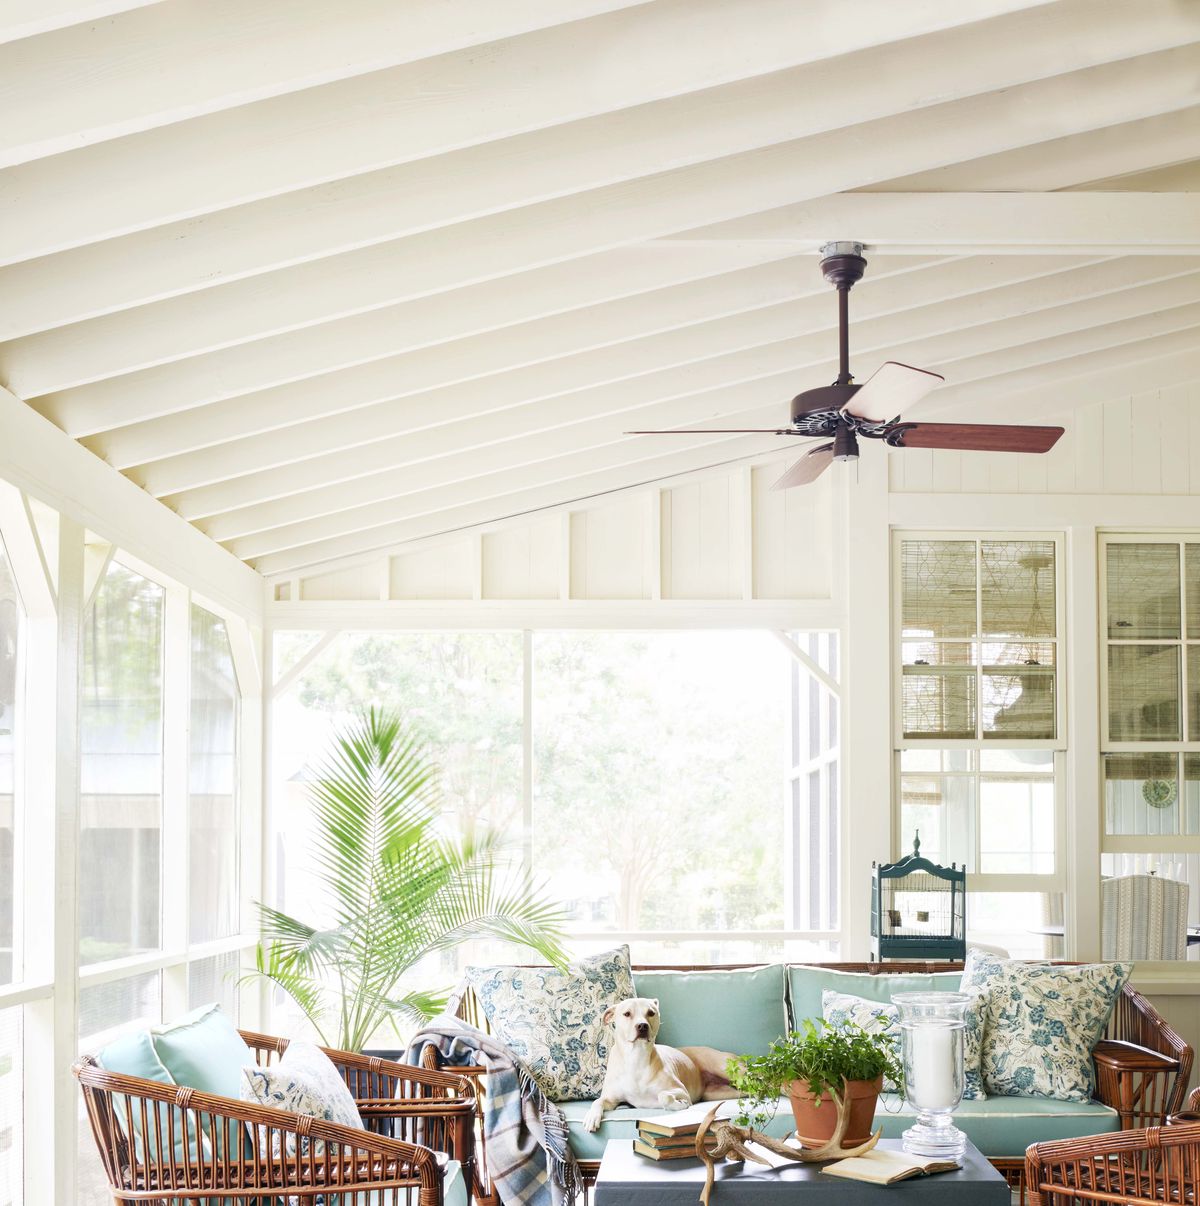 13 Before-And-After Porch Makeover Ideas